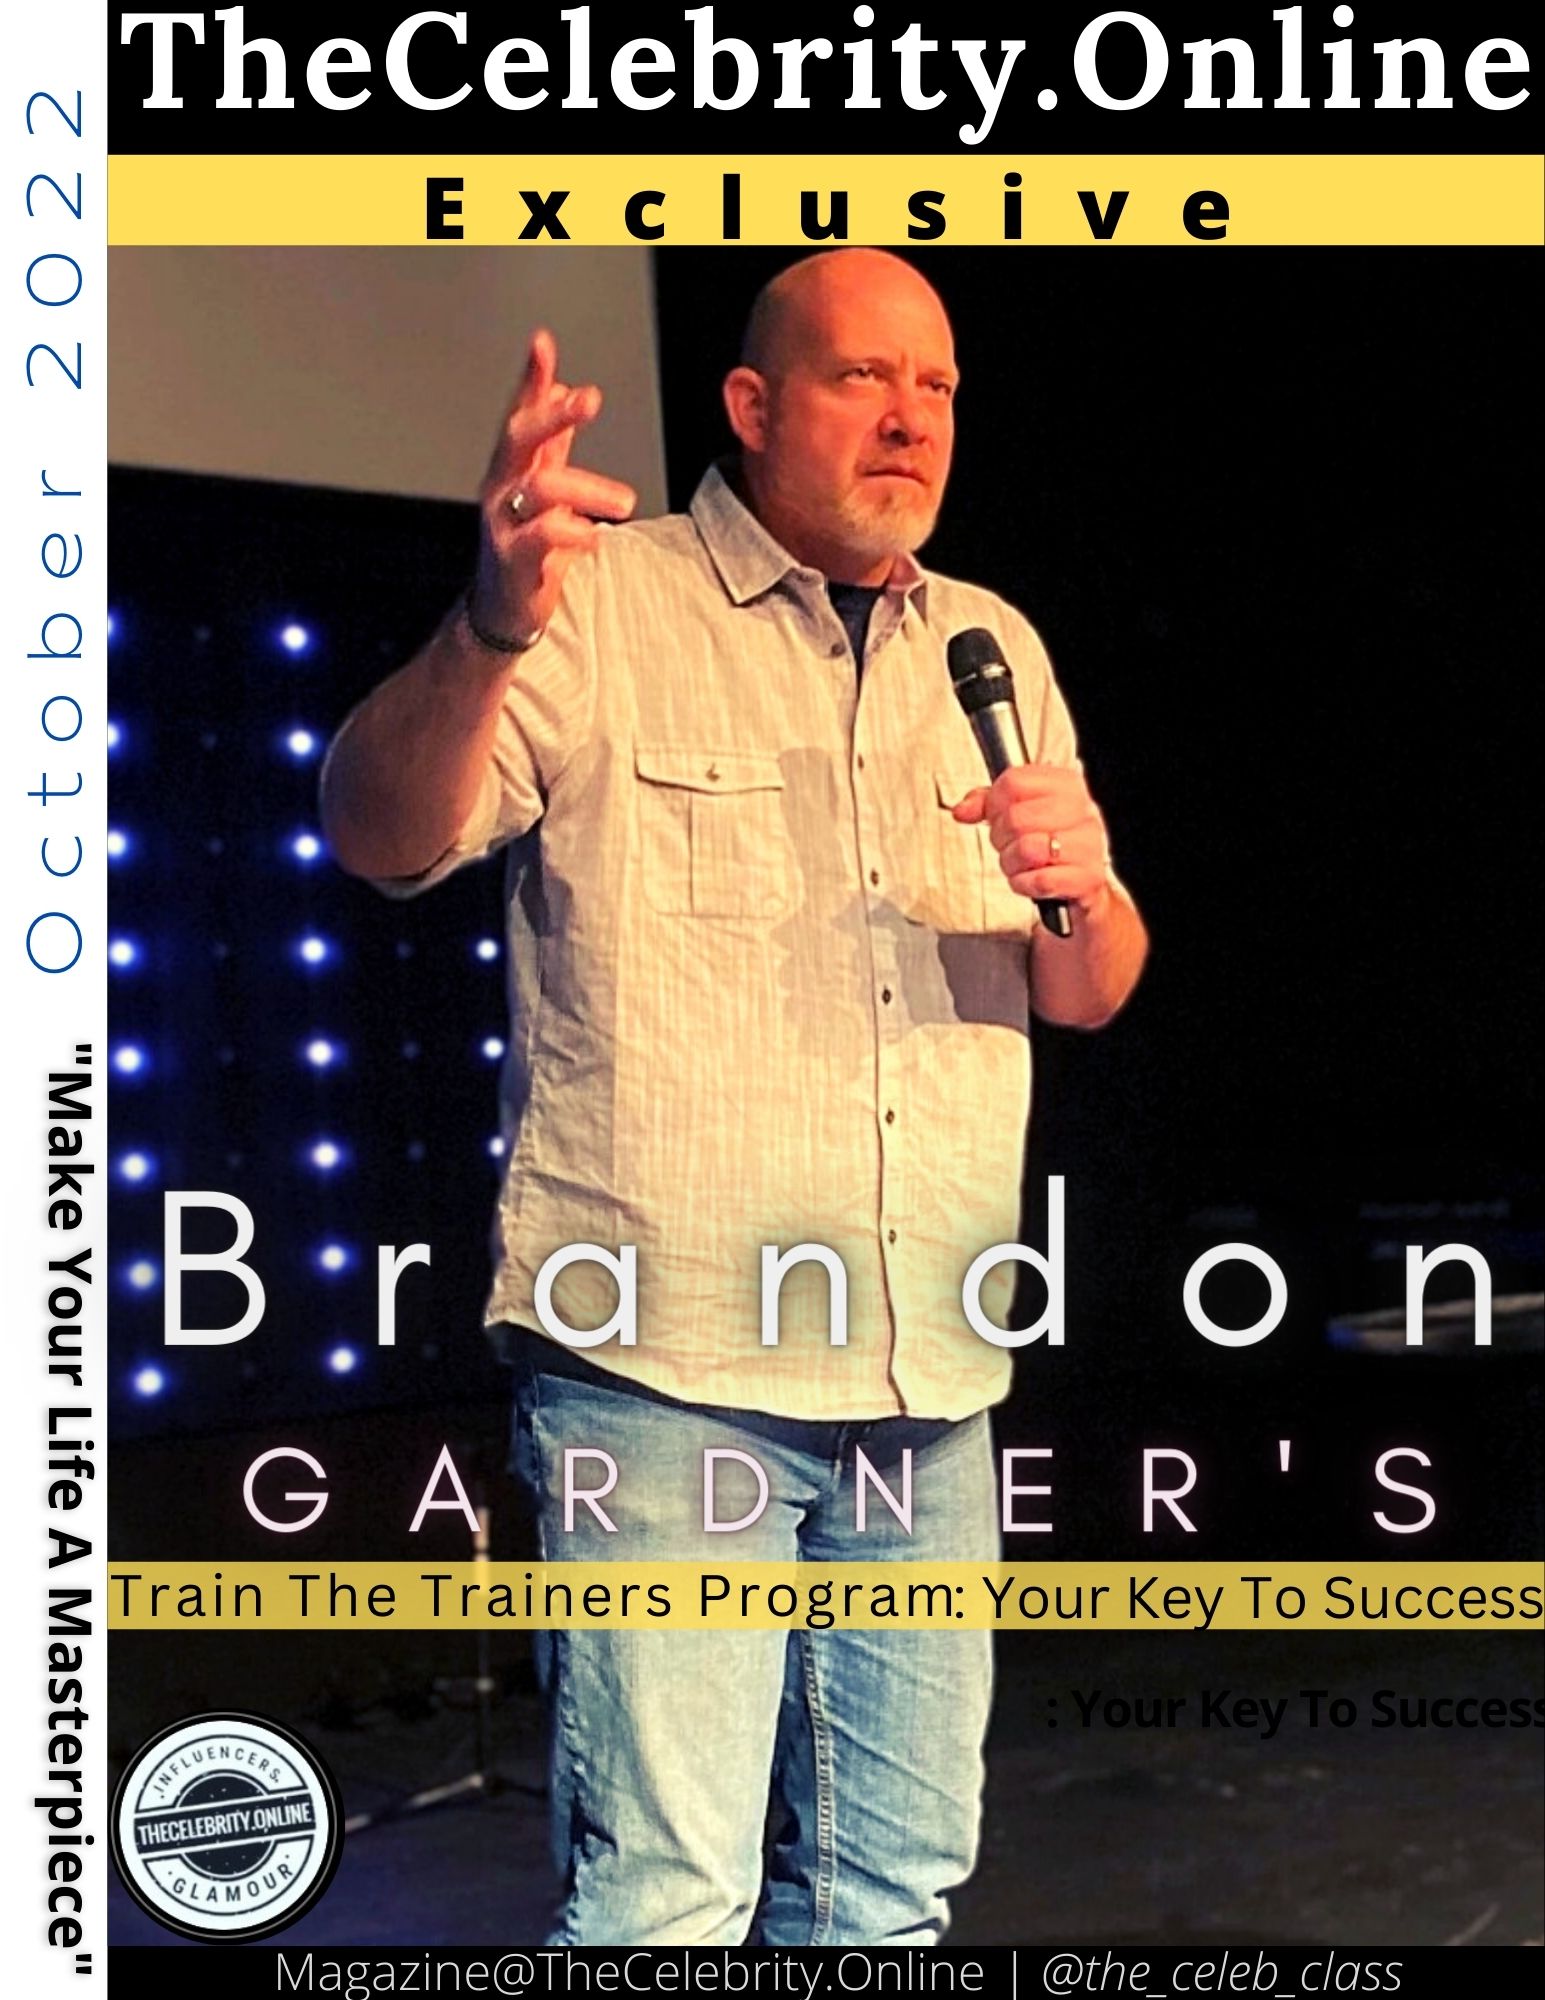 Train The Trainers Program by Brandon Garner is your key to success